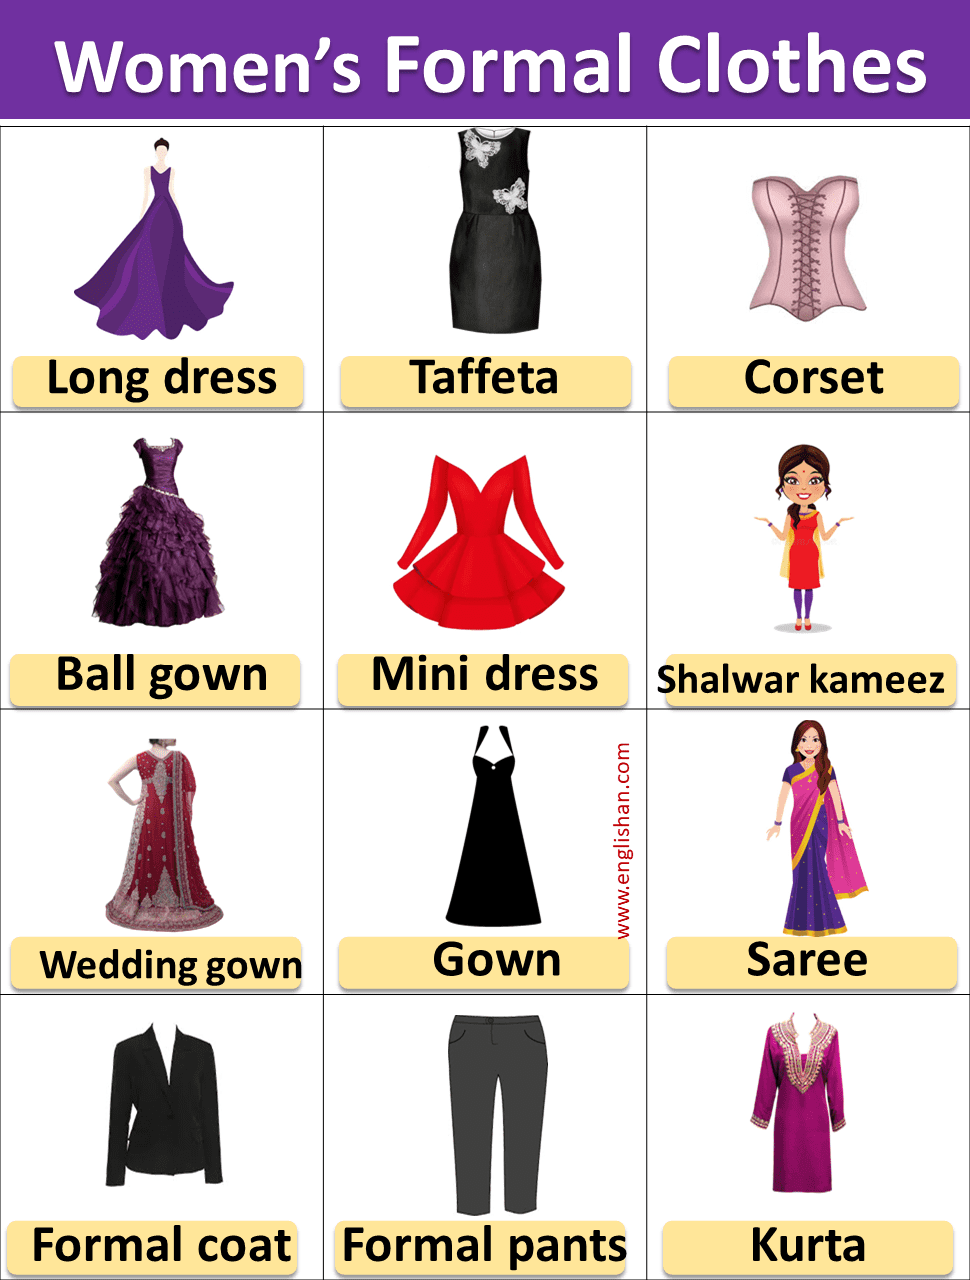 Women’s Formal Clothes